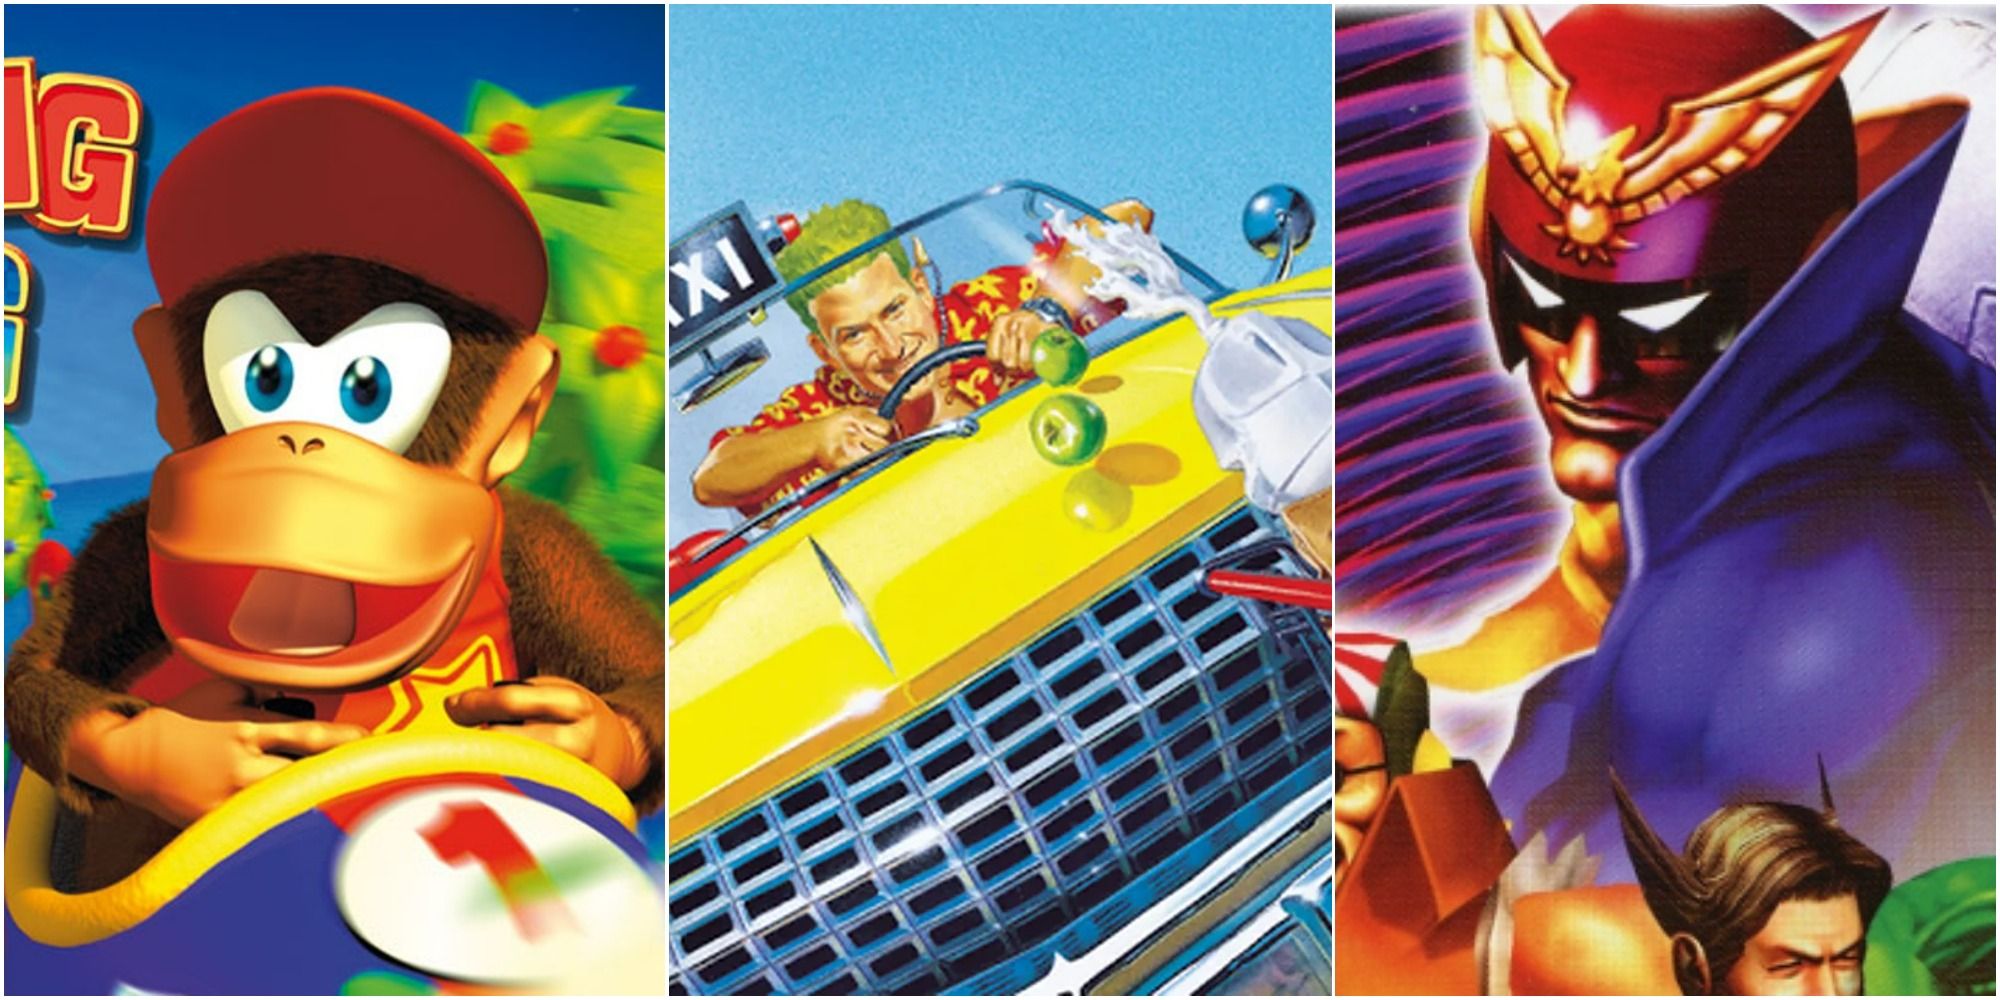 Retro Racing Games Featured Image with Diddy Kong Racing, Crazy Taxi, and F-Zero GX